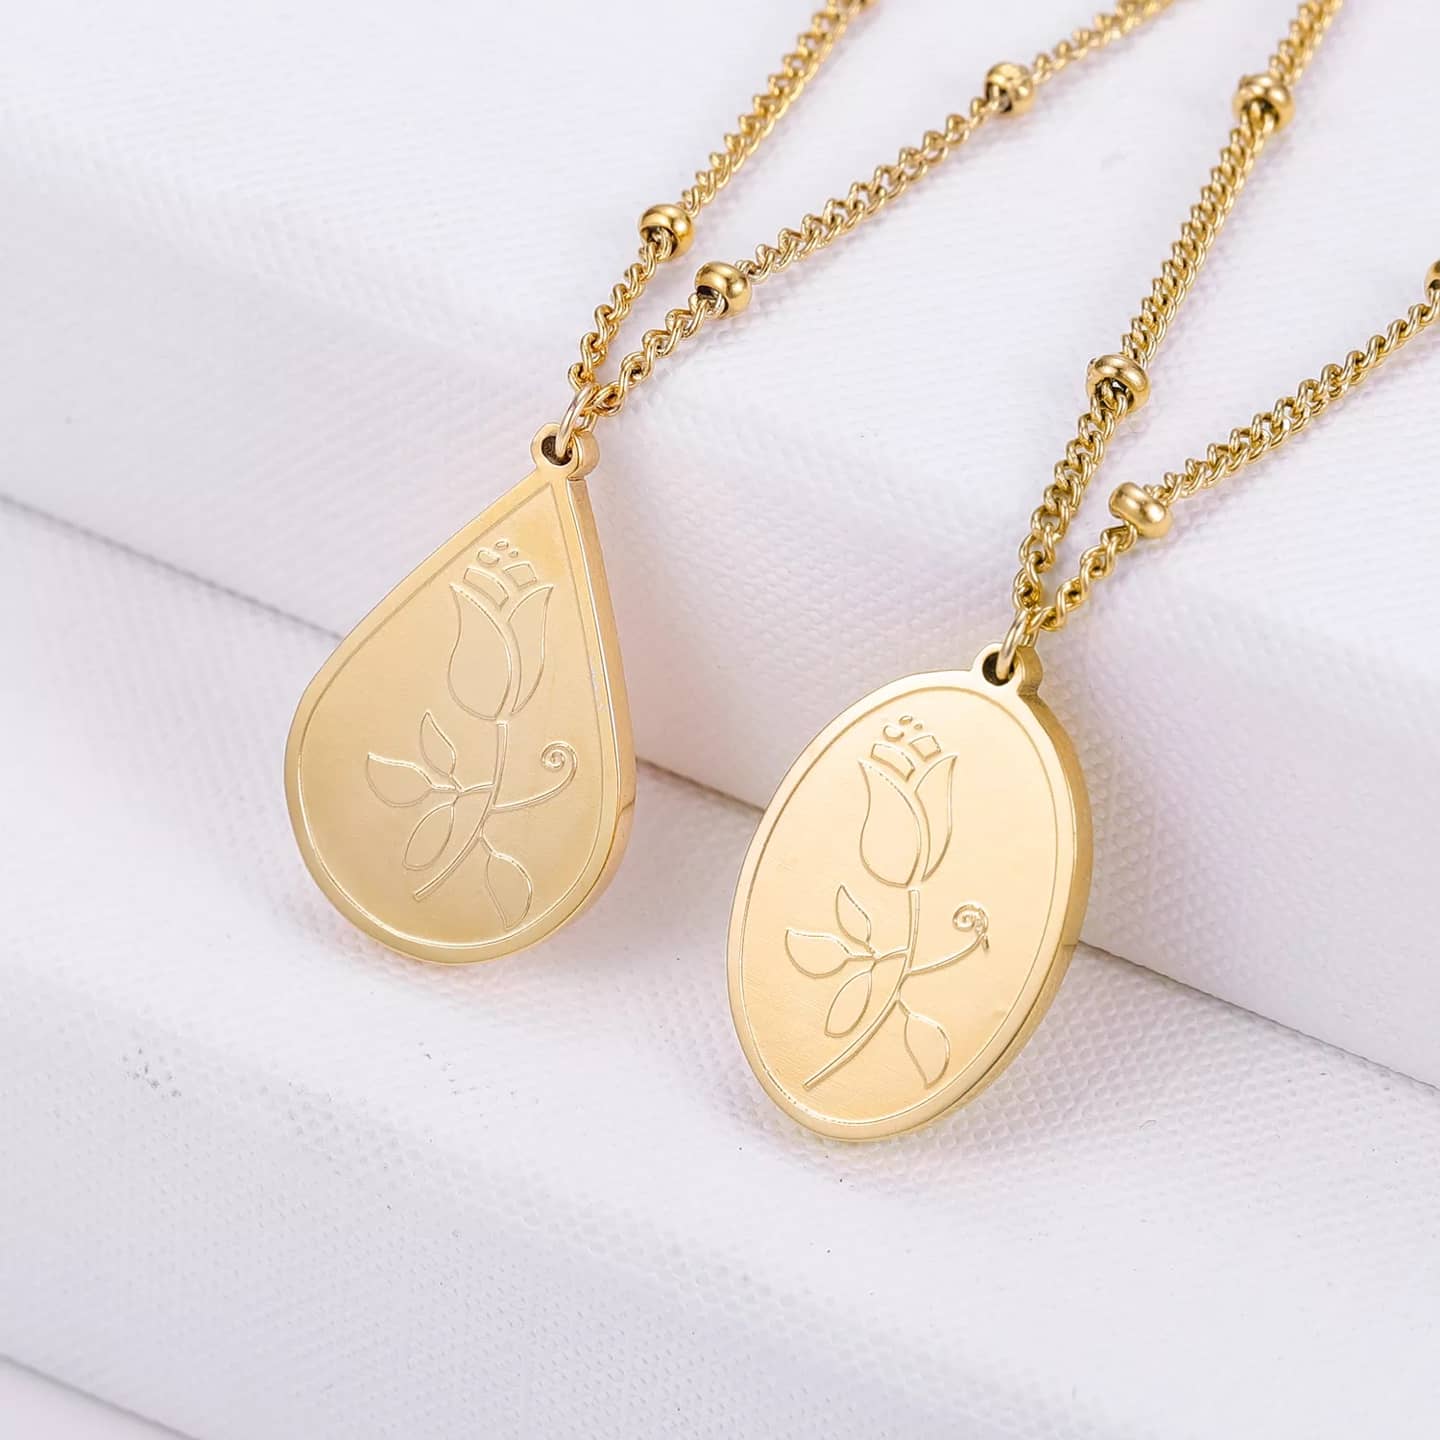 BLOSSOM - Rosa Rose Oval Pendant Necklace Engraving Jewellery